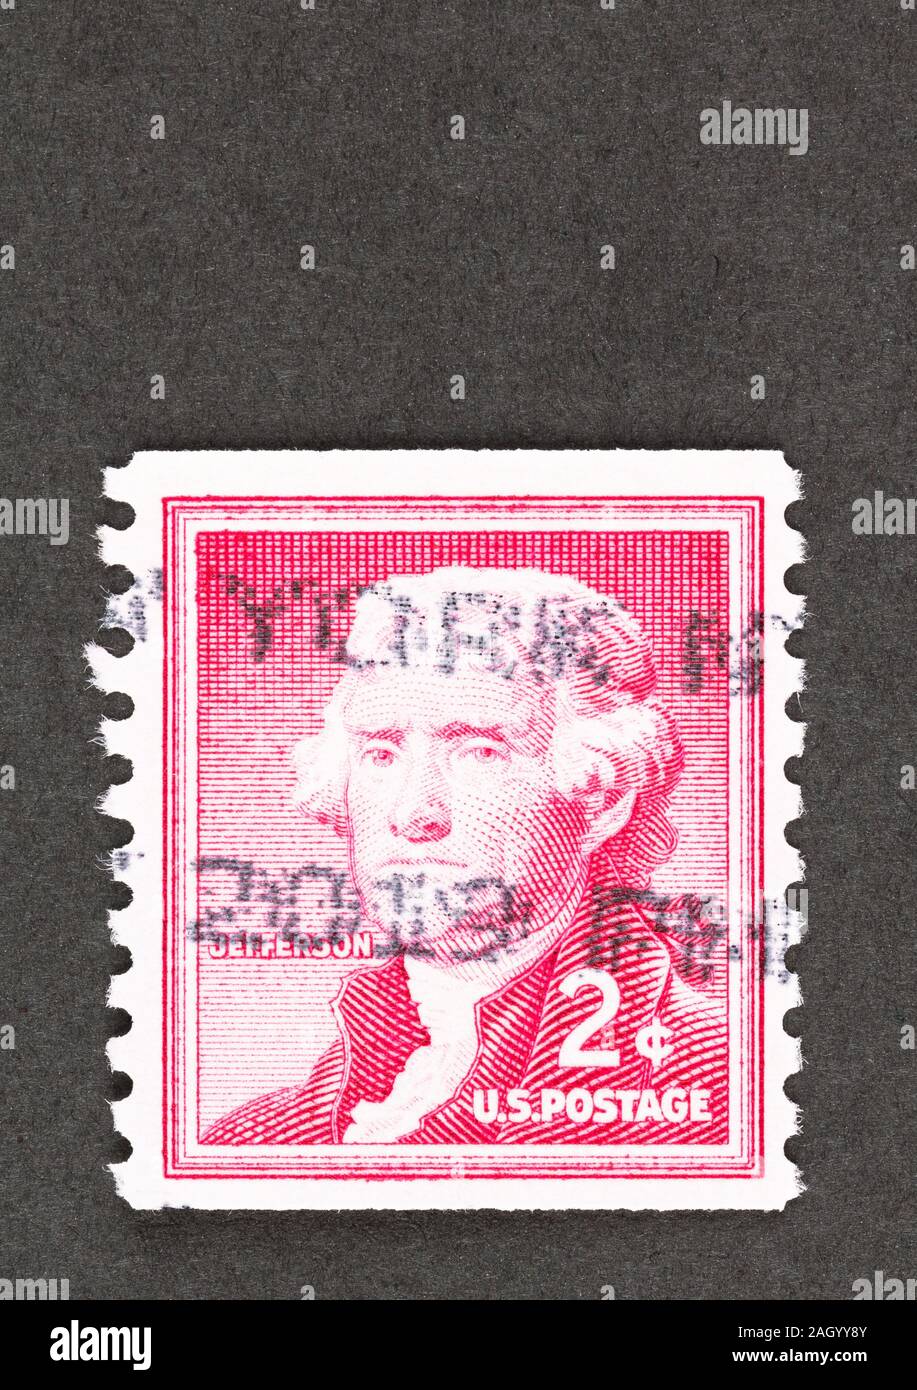 USA coil postage stamp with former president Thomas Jefferson on red two cent definitive stamp from the Liberty Issue series Stock Photo